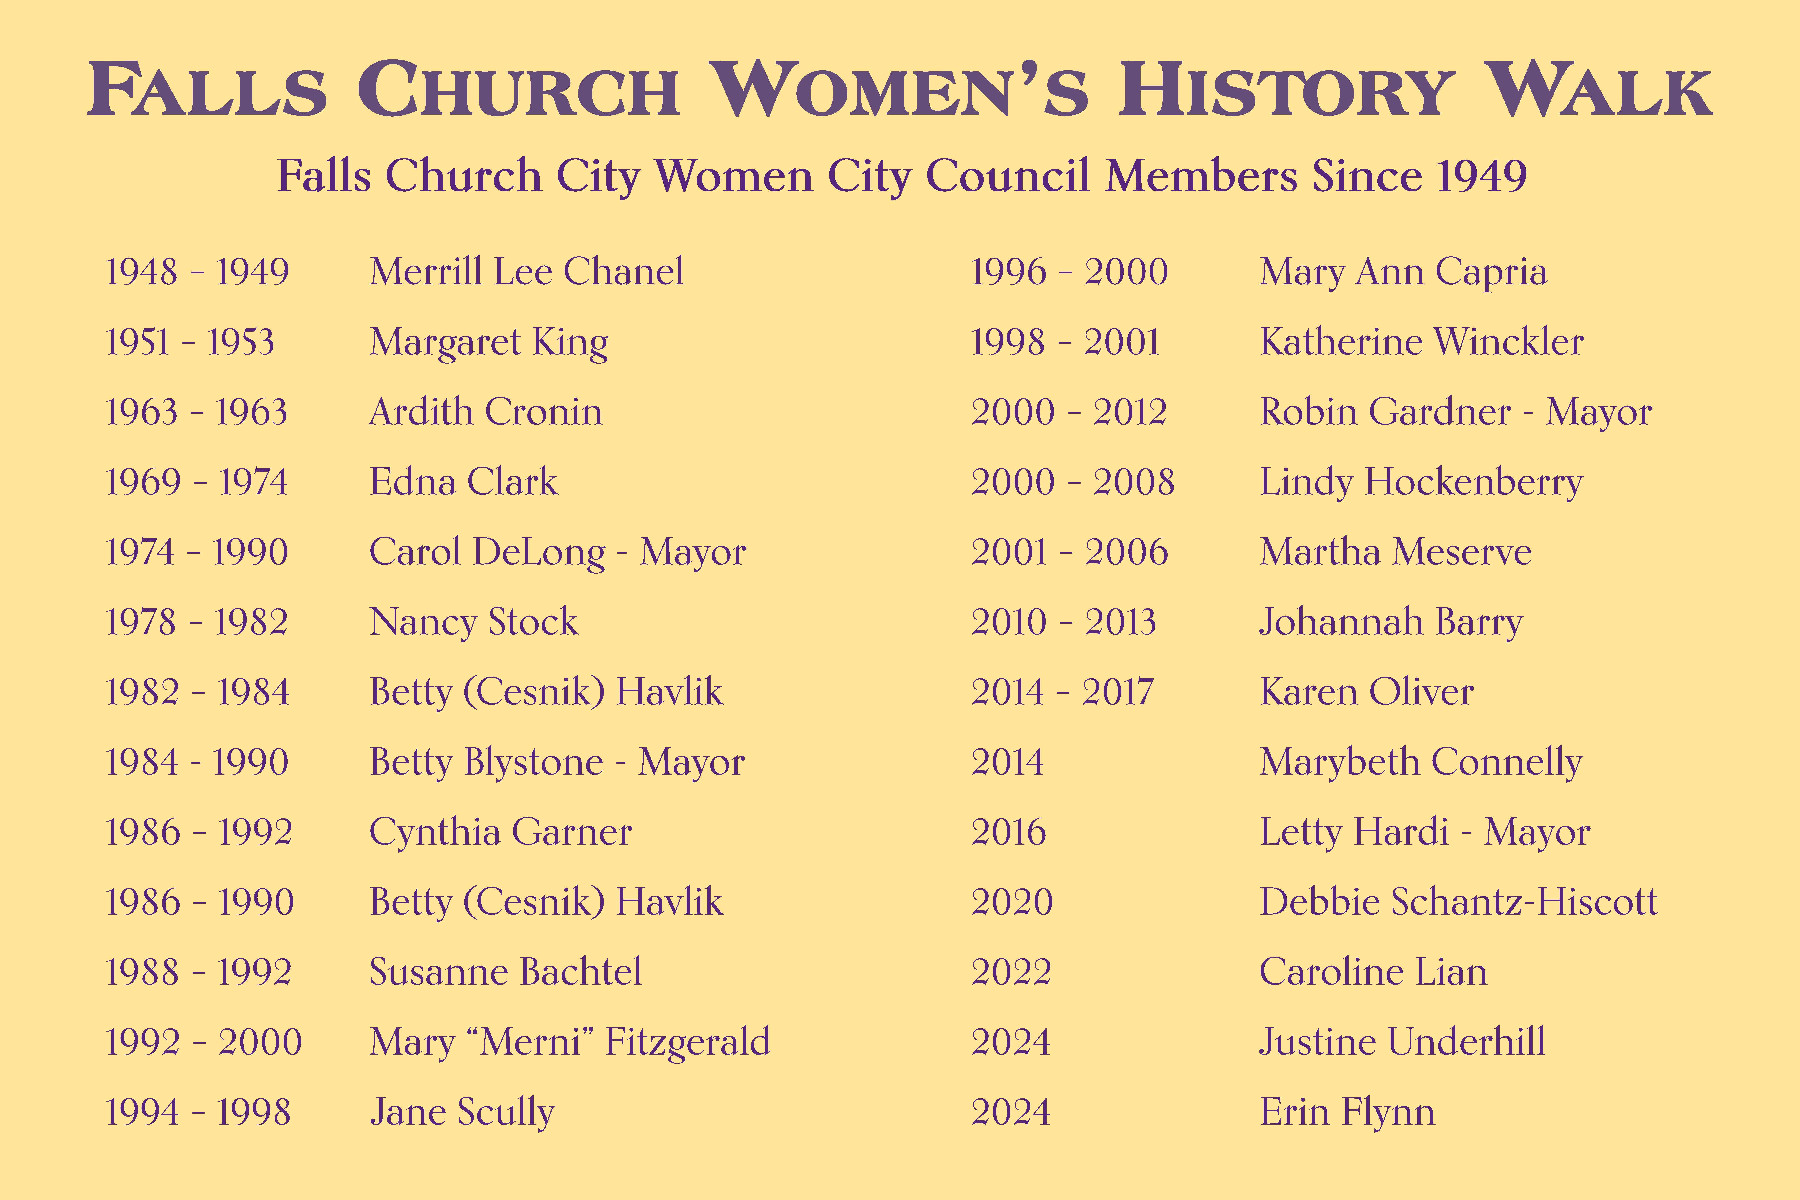 List of women in City Council